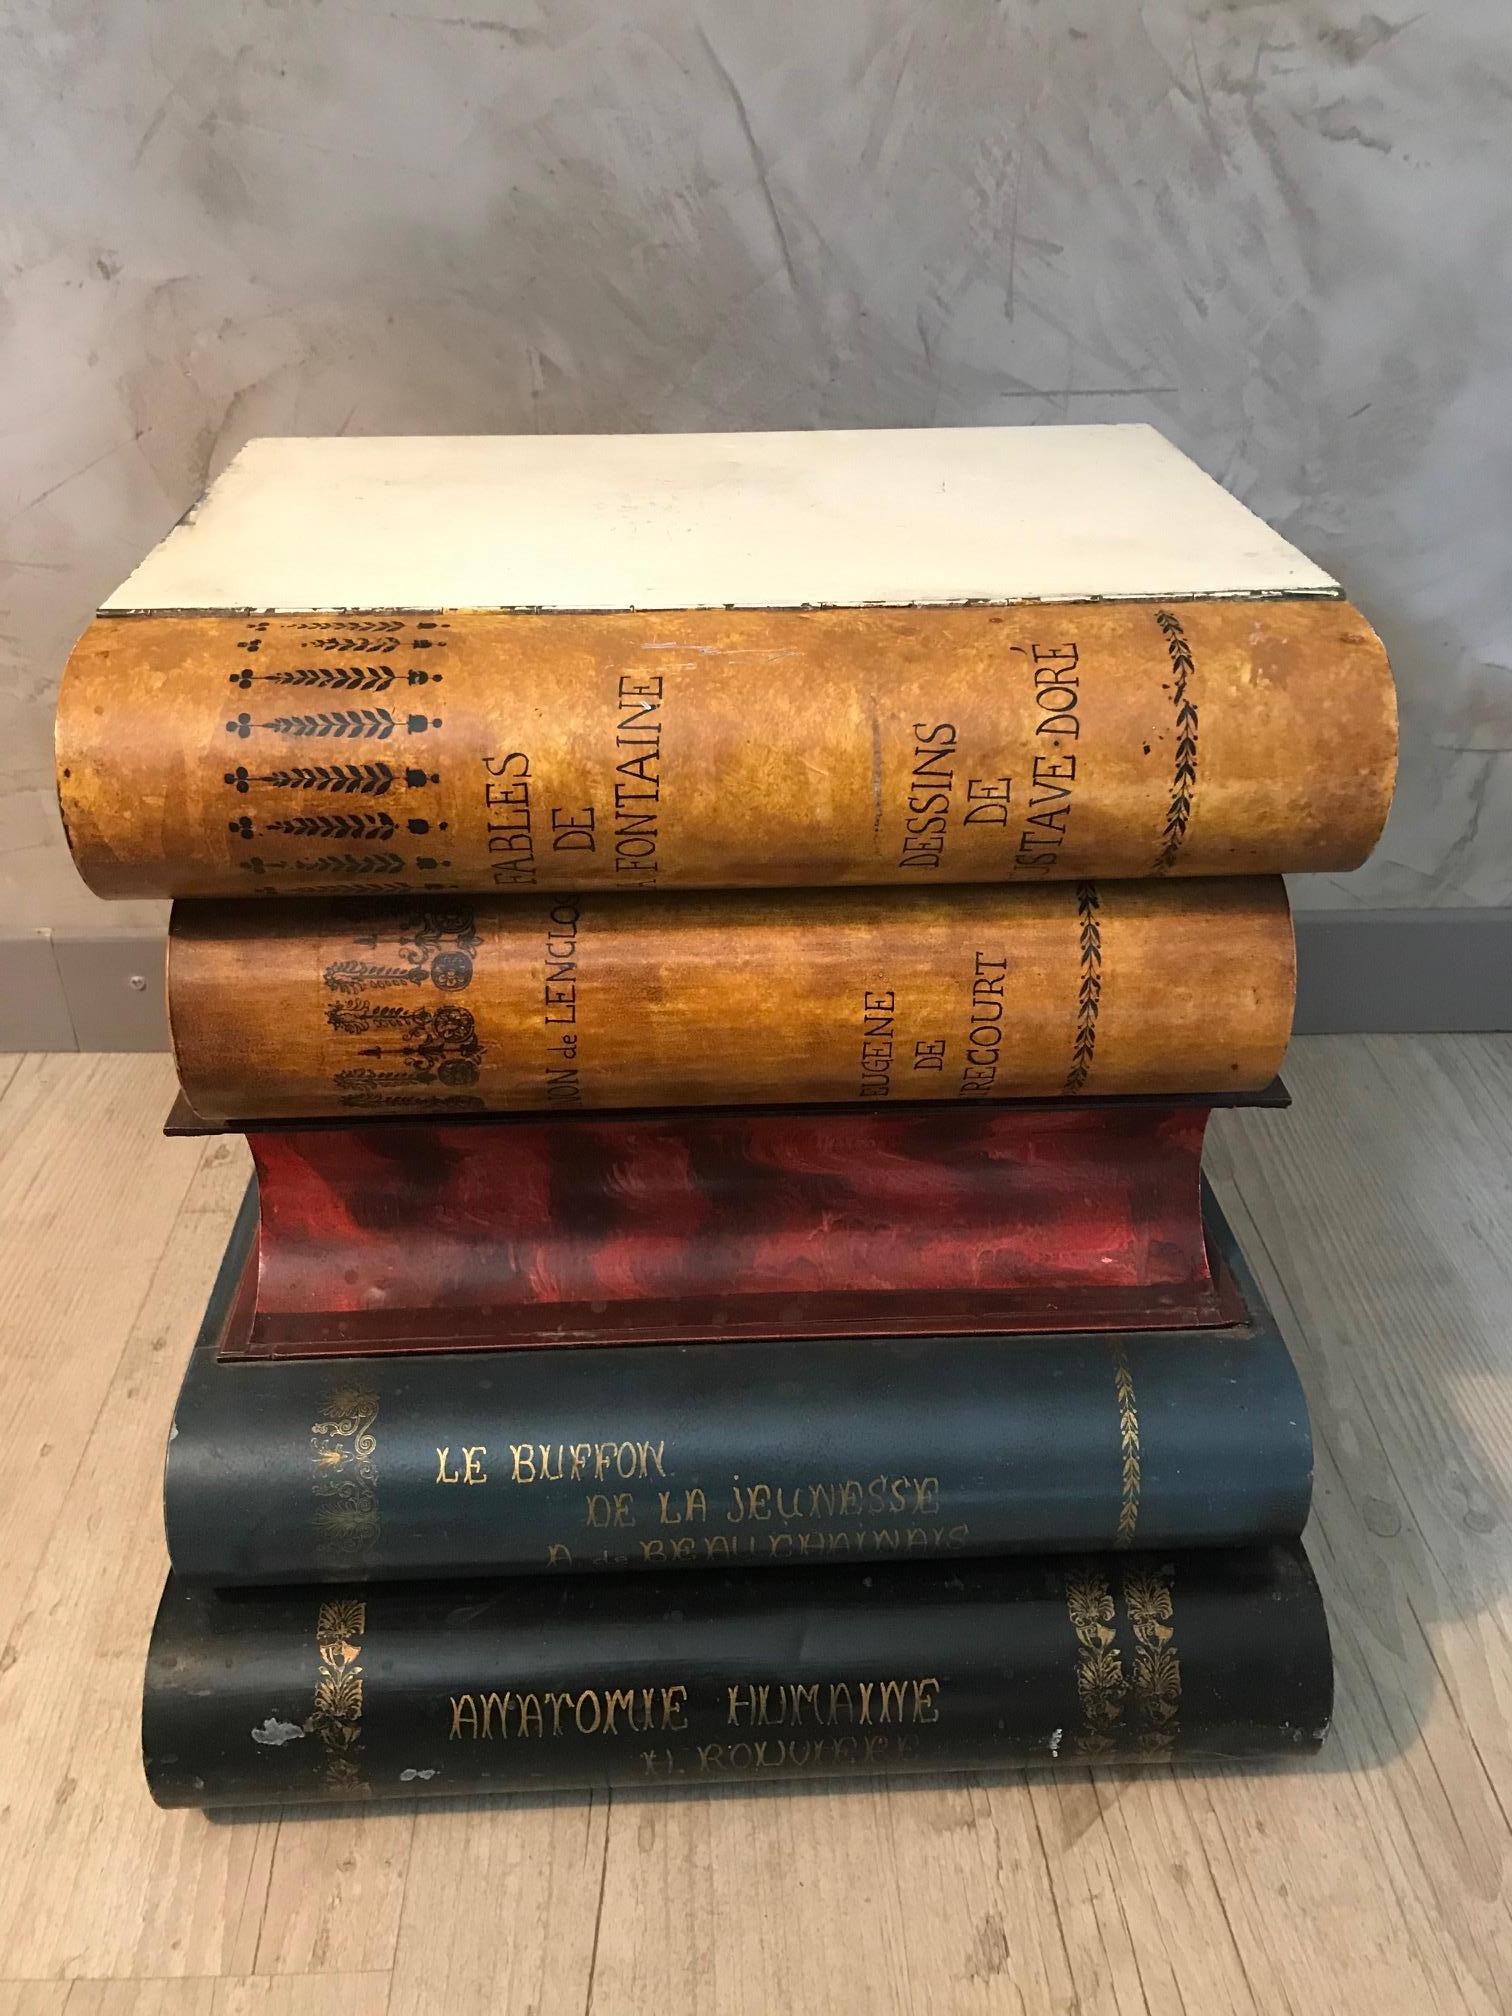 Very nice and original piece! 20th century French metal book imitation safe from the 1920s.
Imitation of five large books: 